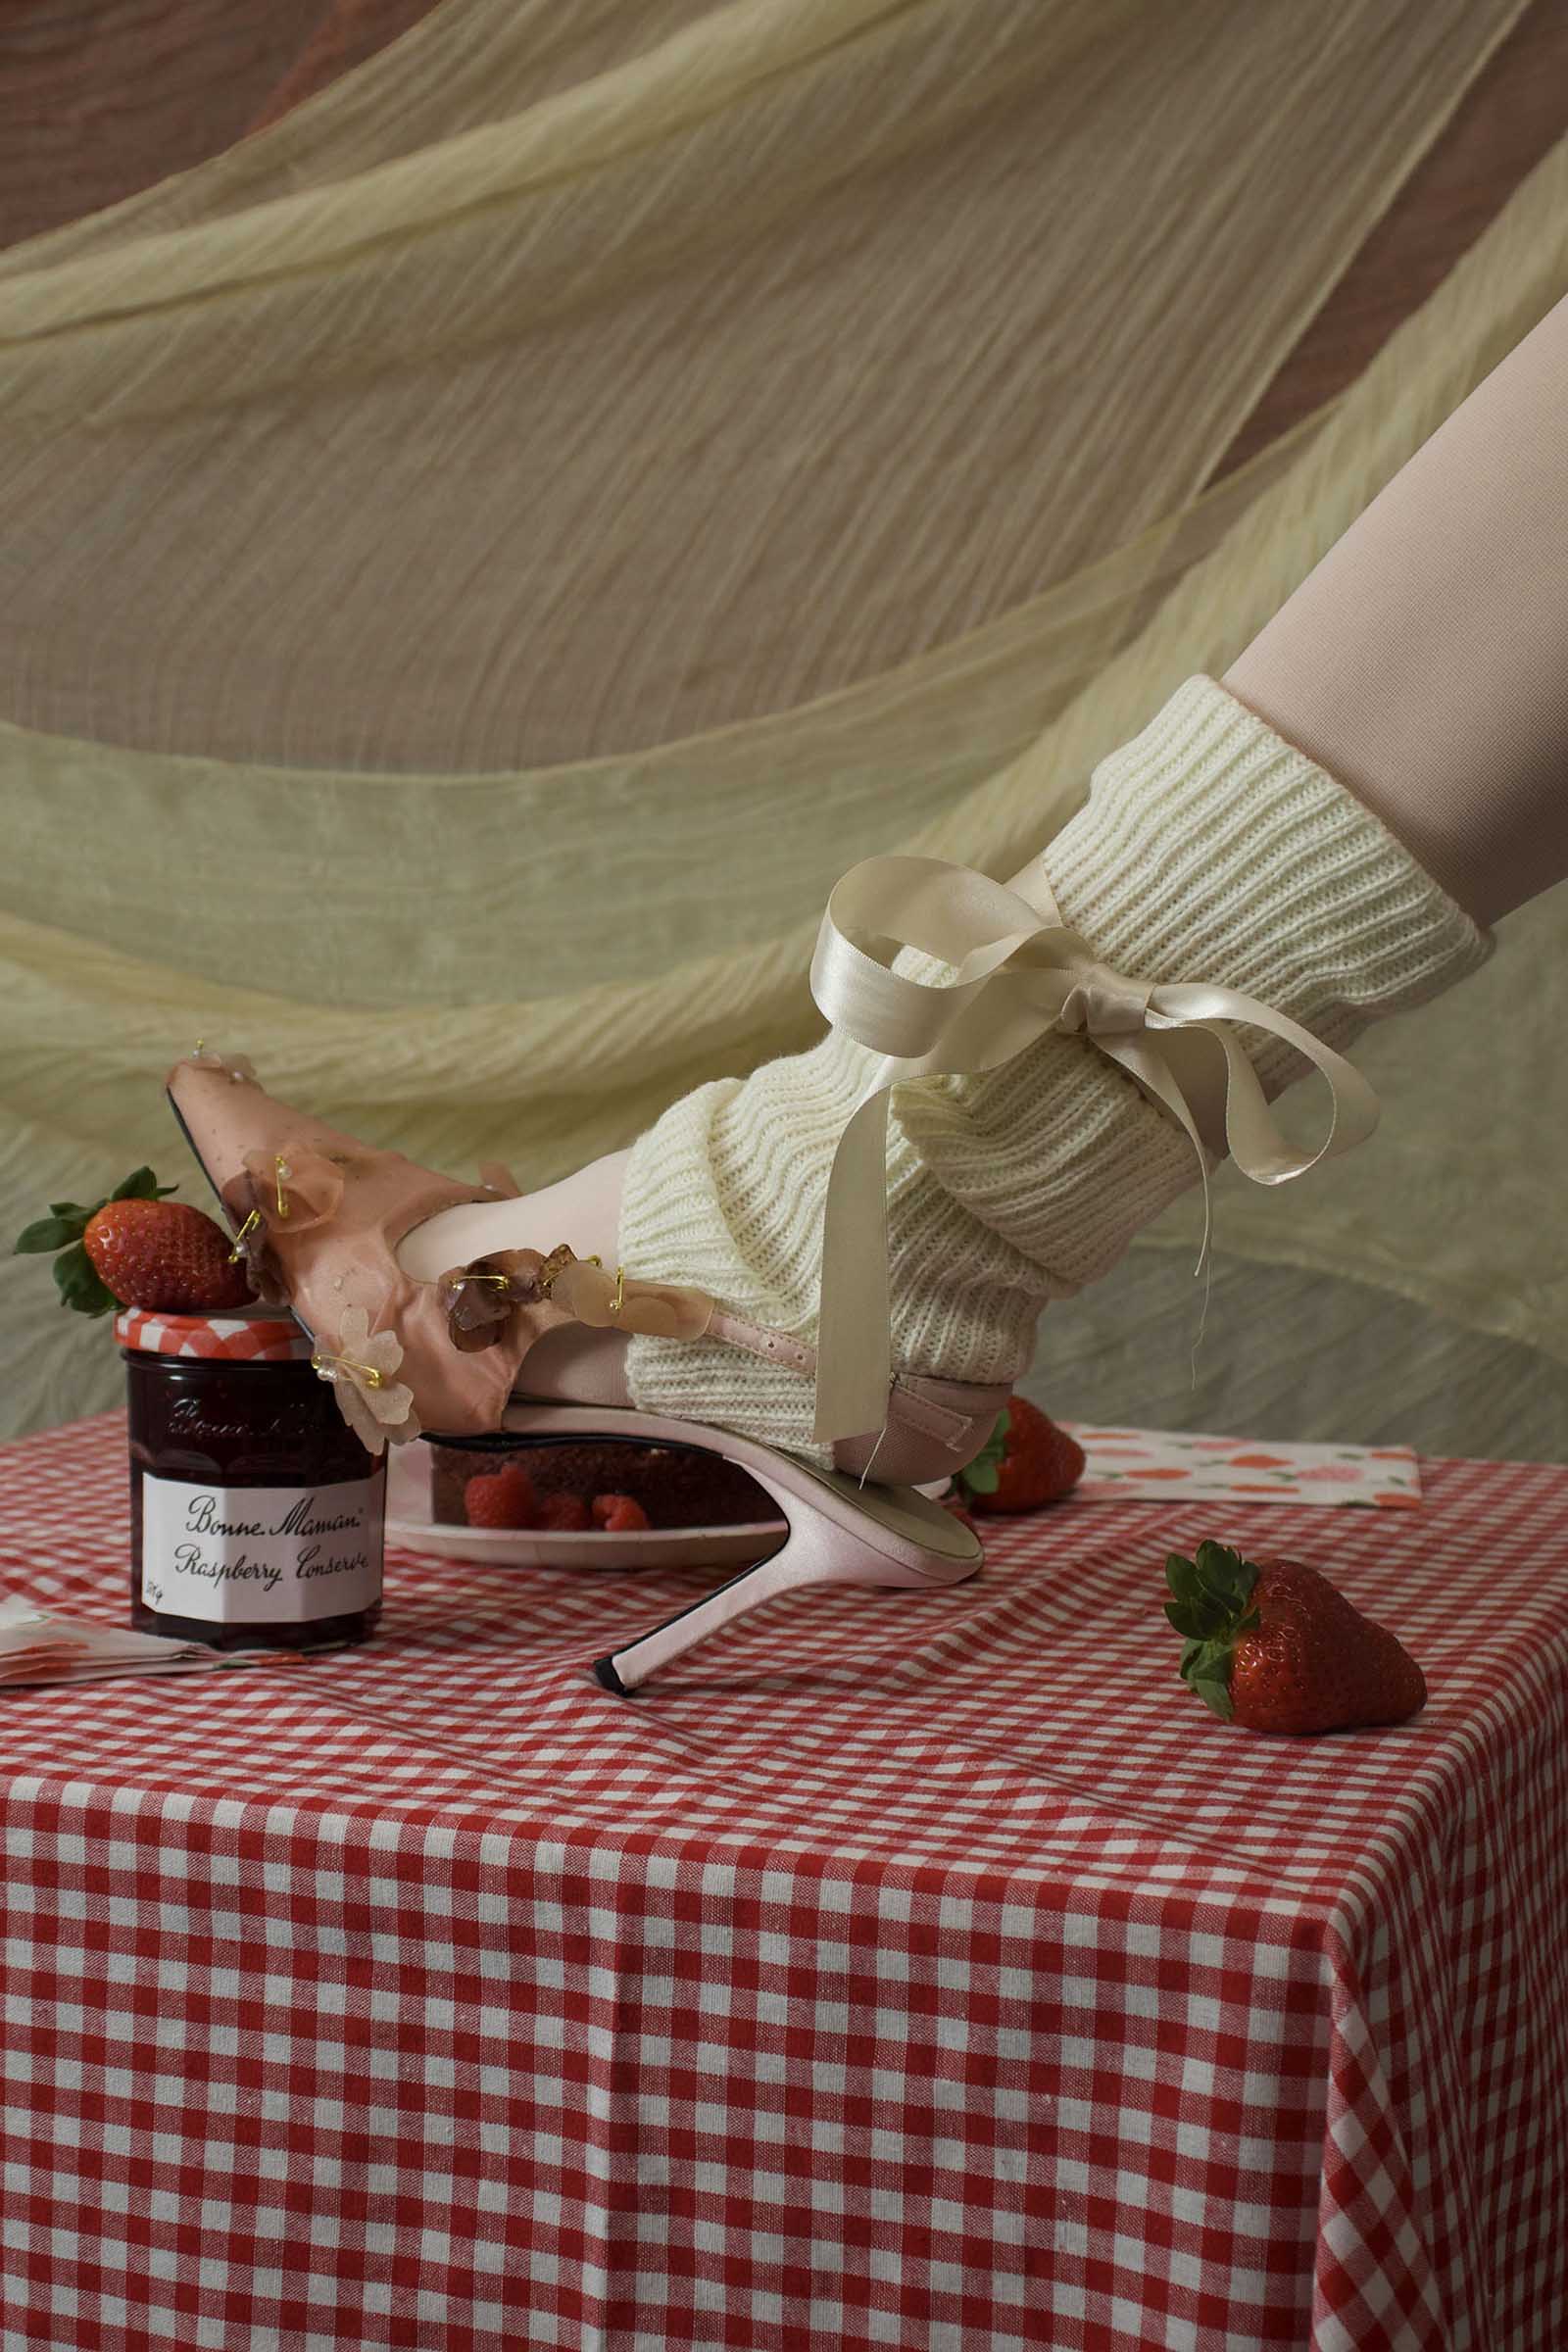 BA Fashion Design work by Mollie Green showing raspberry jam jar on red gingham table with models leg wearing pink heel with cream ribbon leant againt it.